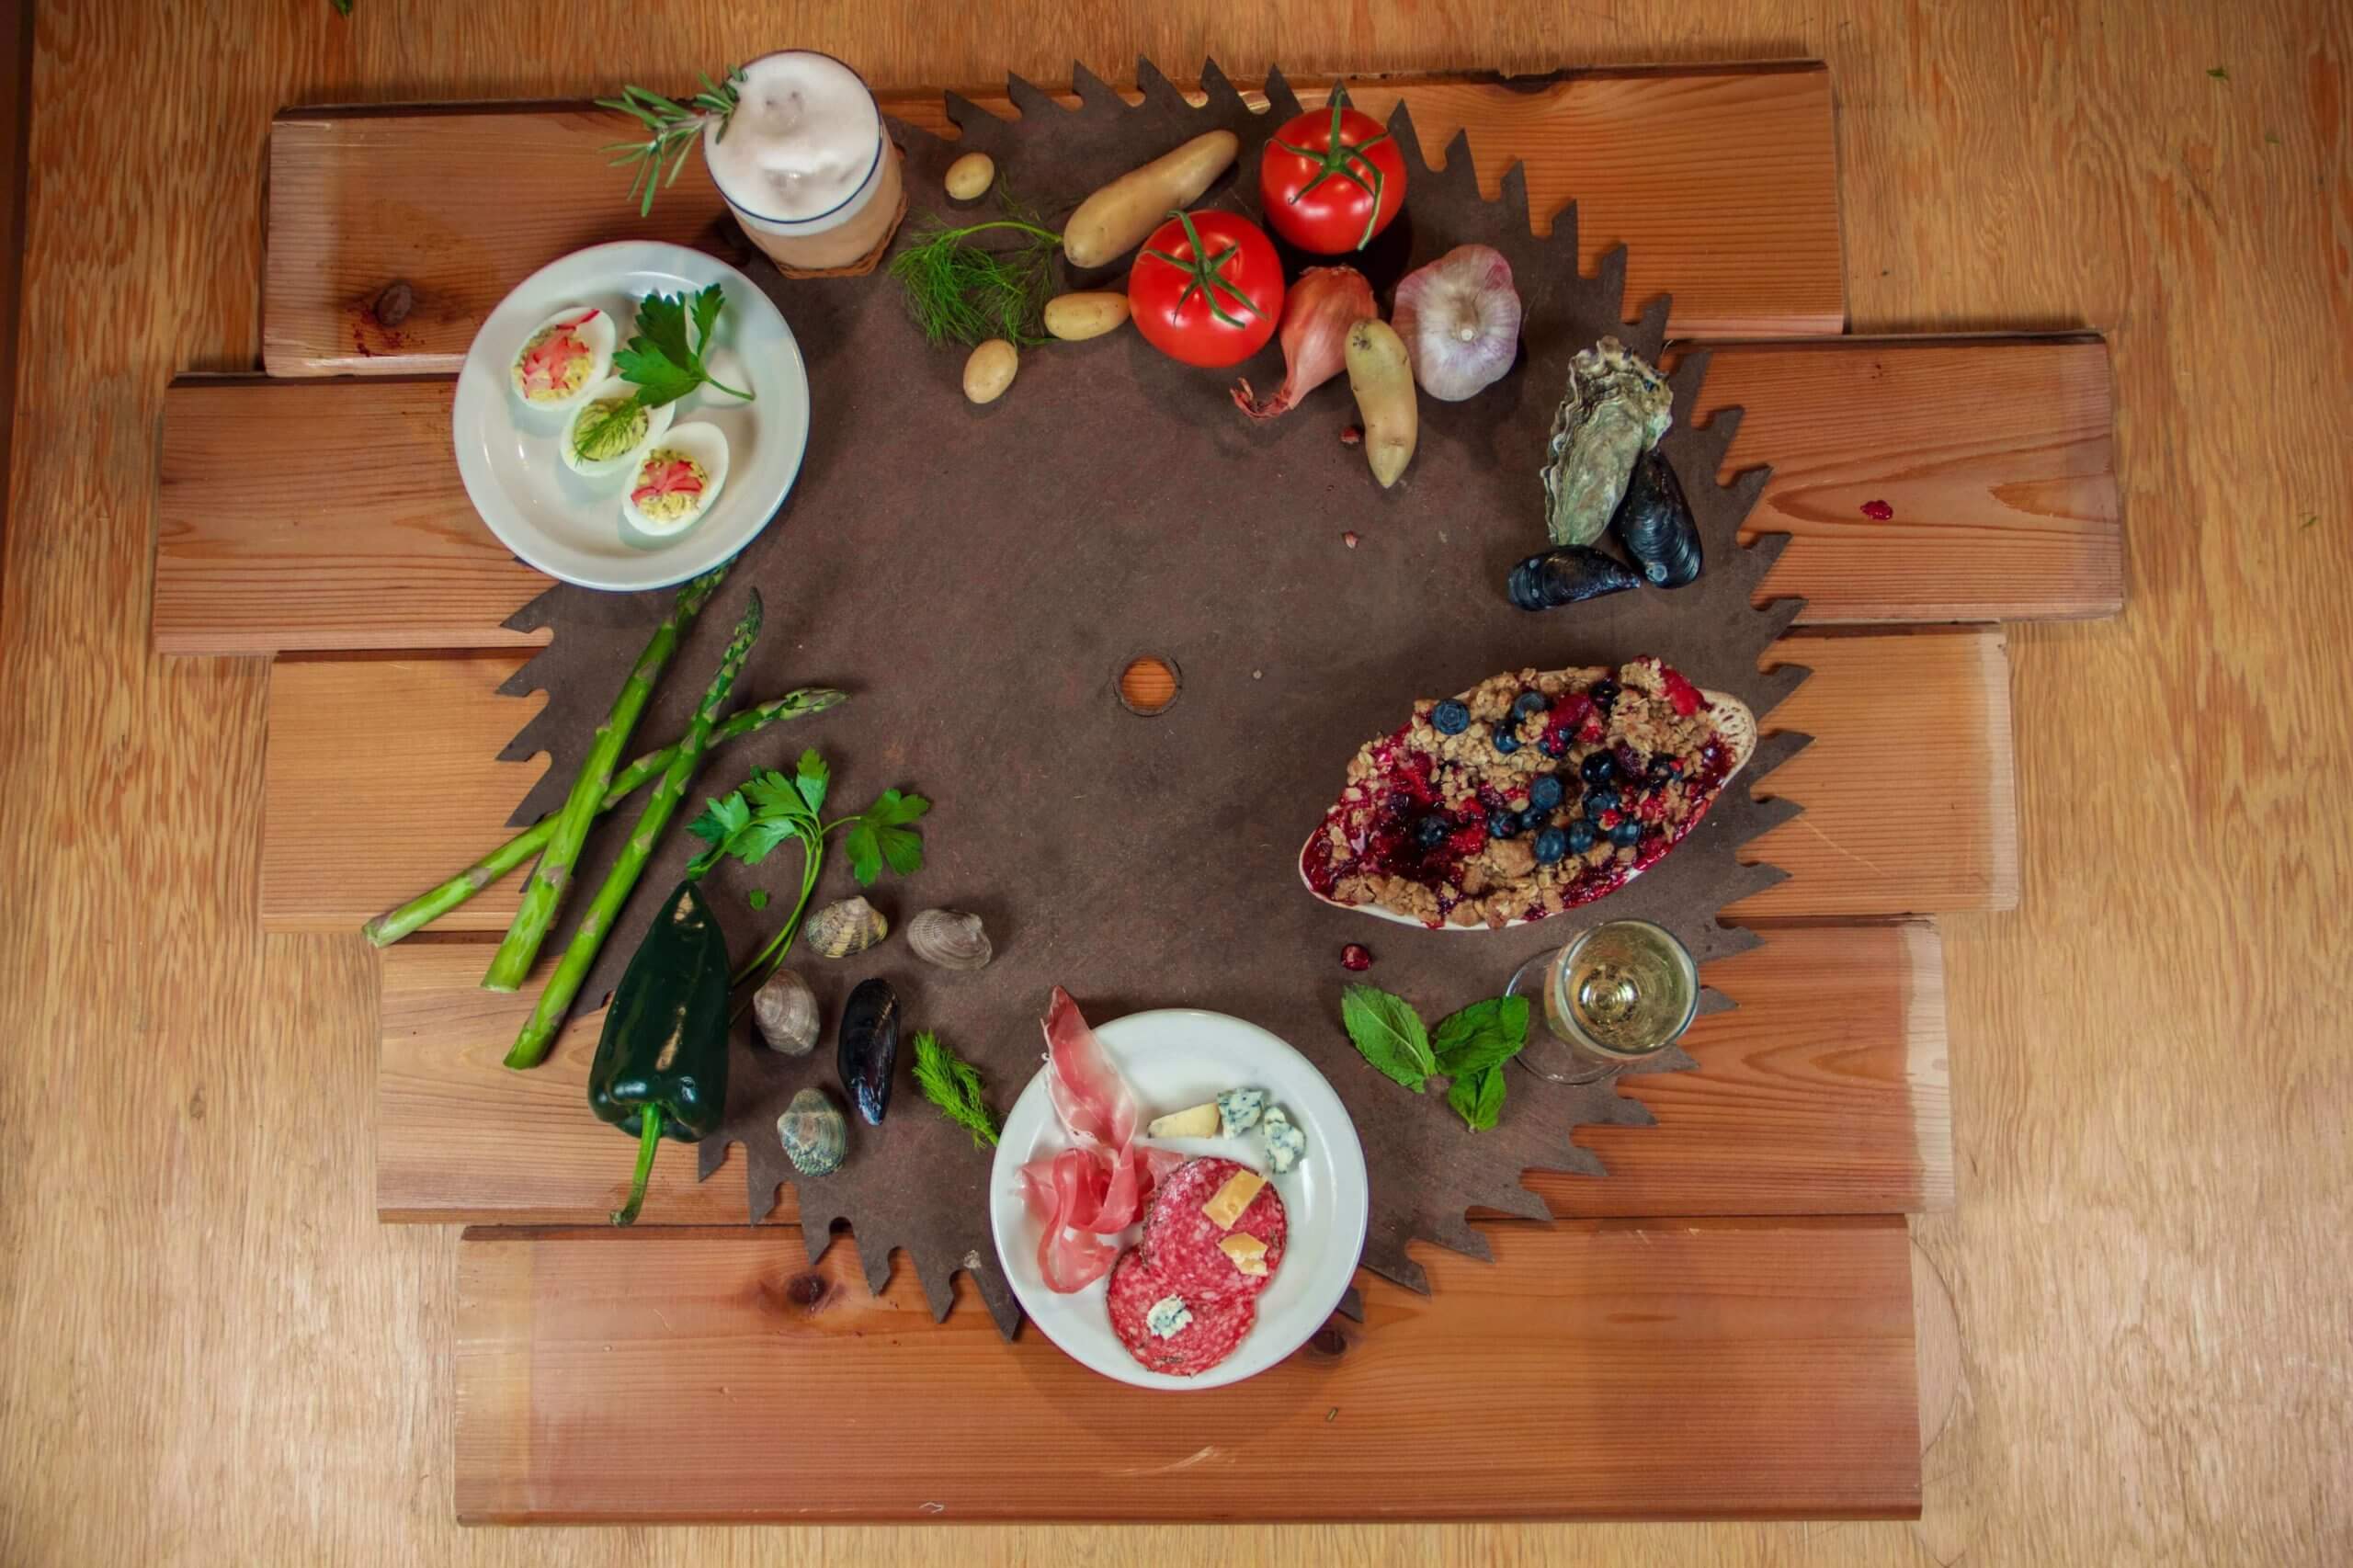 Top down view of Shingletown's food and vegetables on a large saw